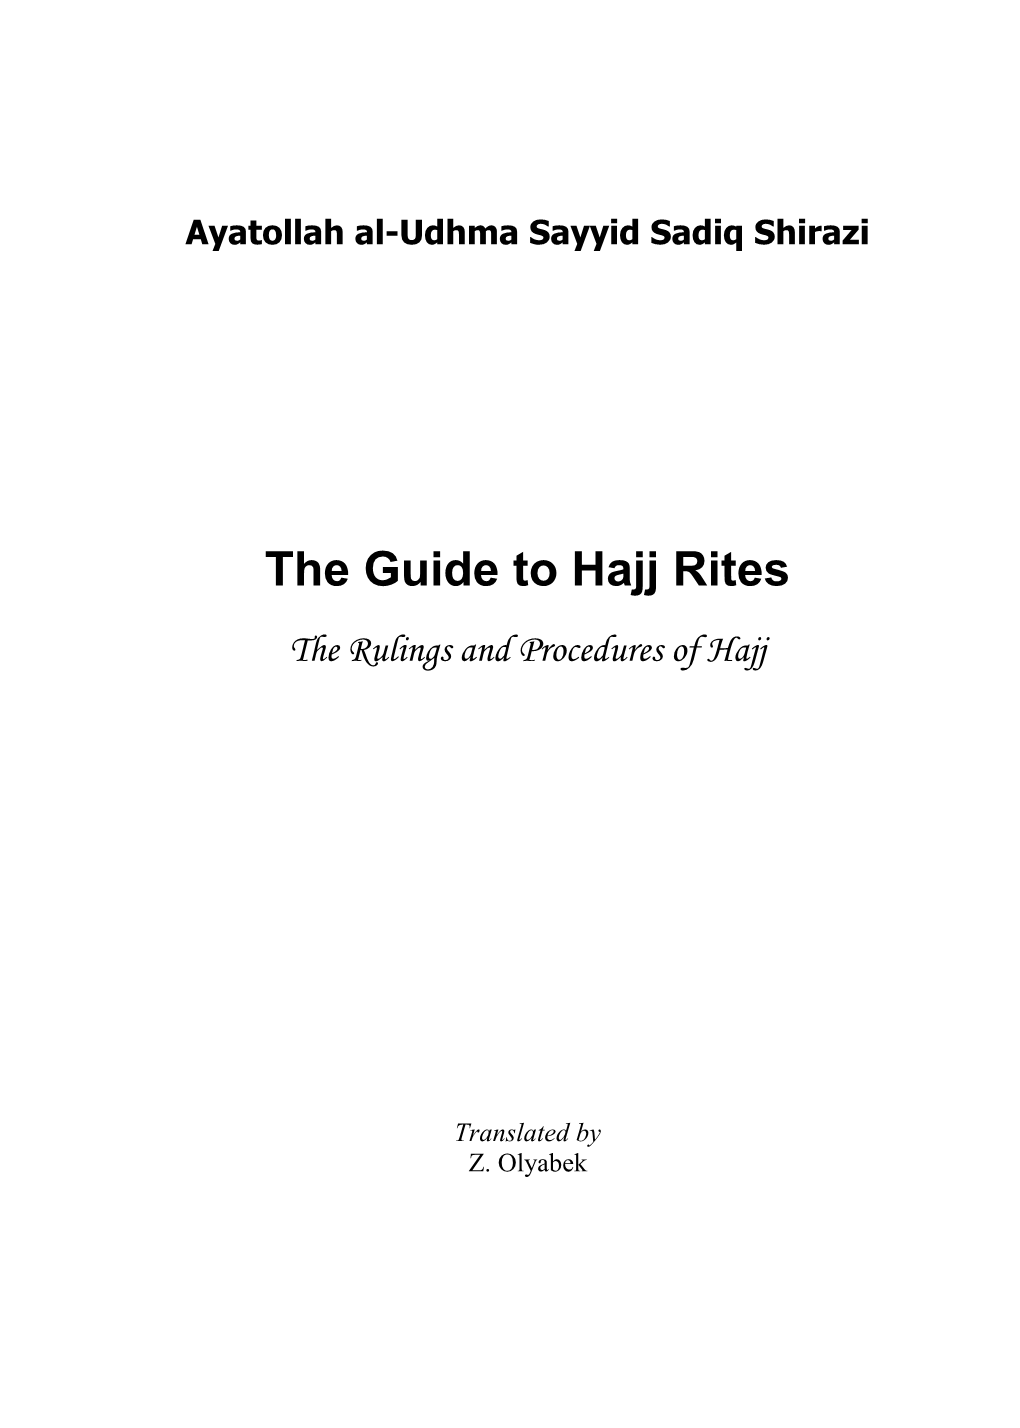 The Guide to Hajj Rites the Rulings and Procedures of Hajj